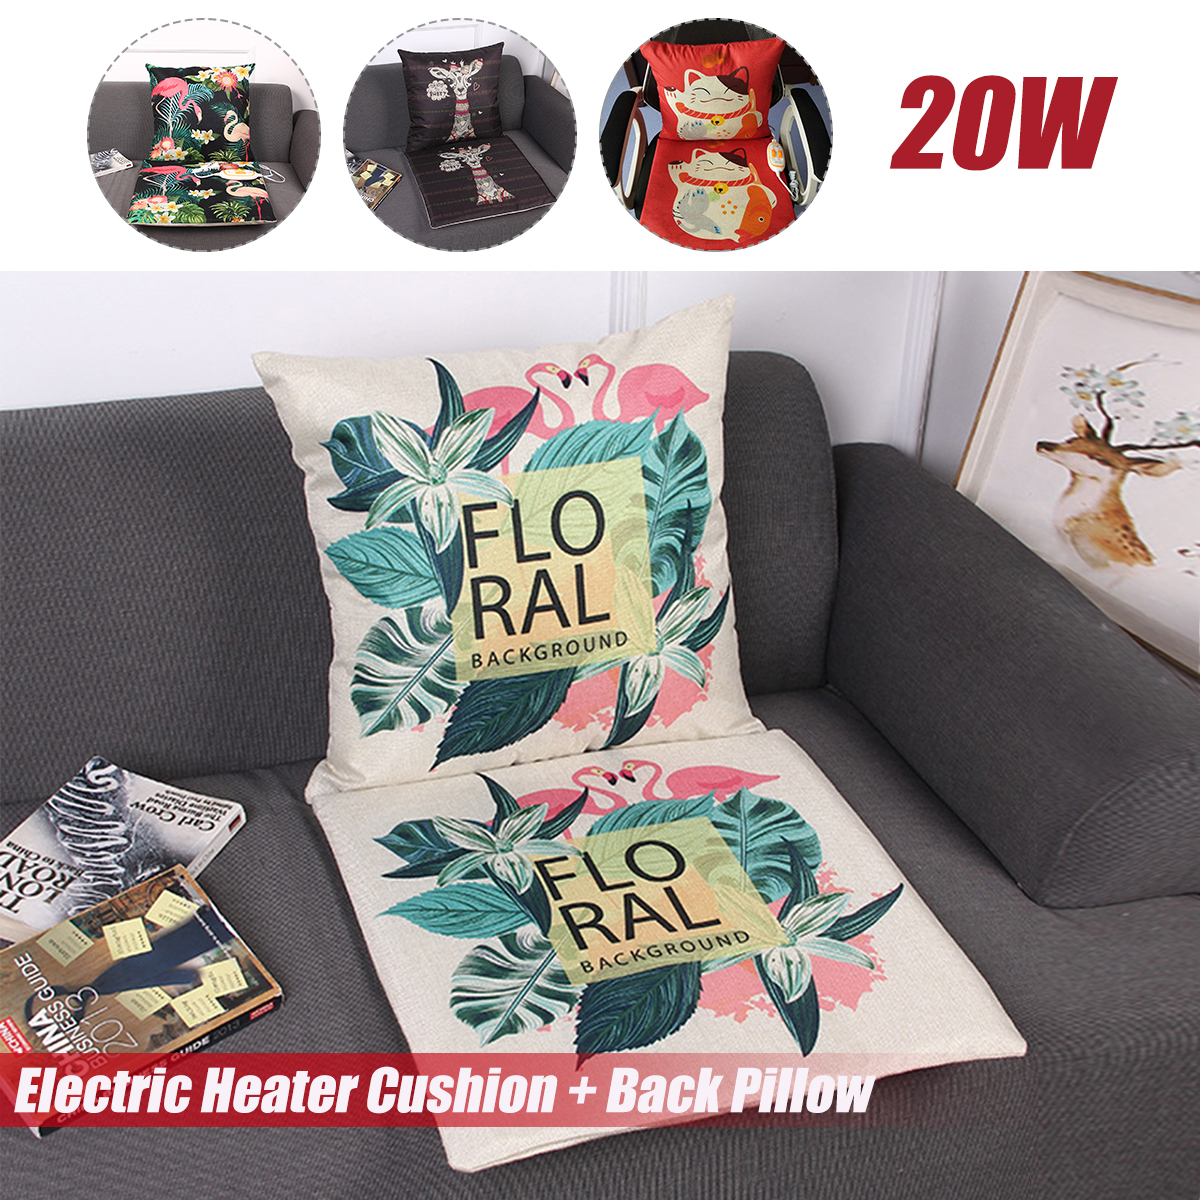 220V-Electric-Heater-Seat-Cushion--Back-Pillow-Car-Seat-Pads-Home-Office-Chair-Mat-1413468